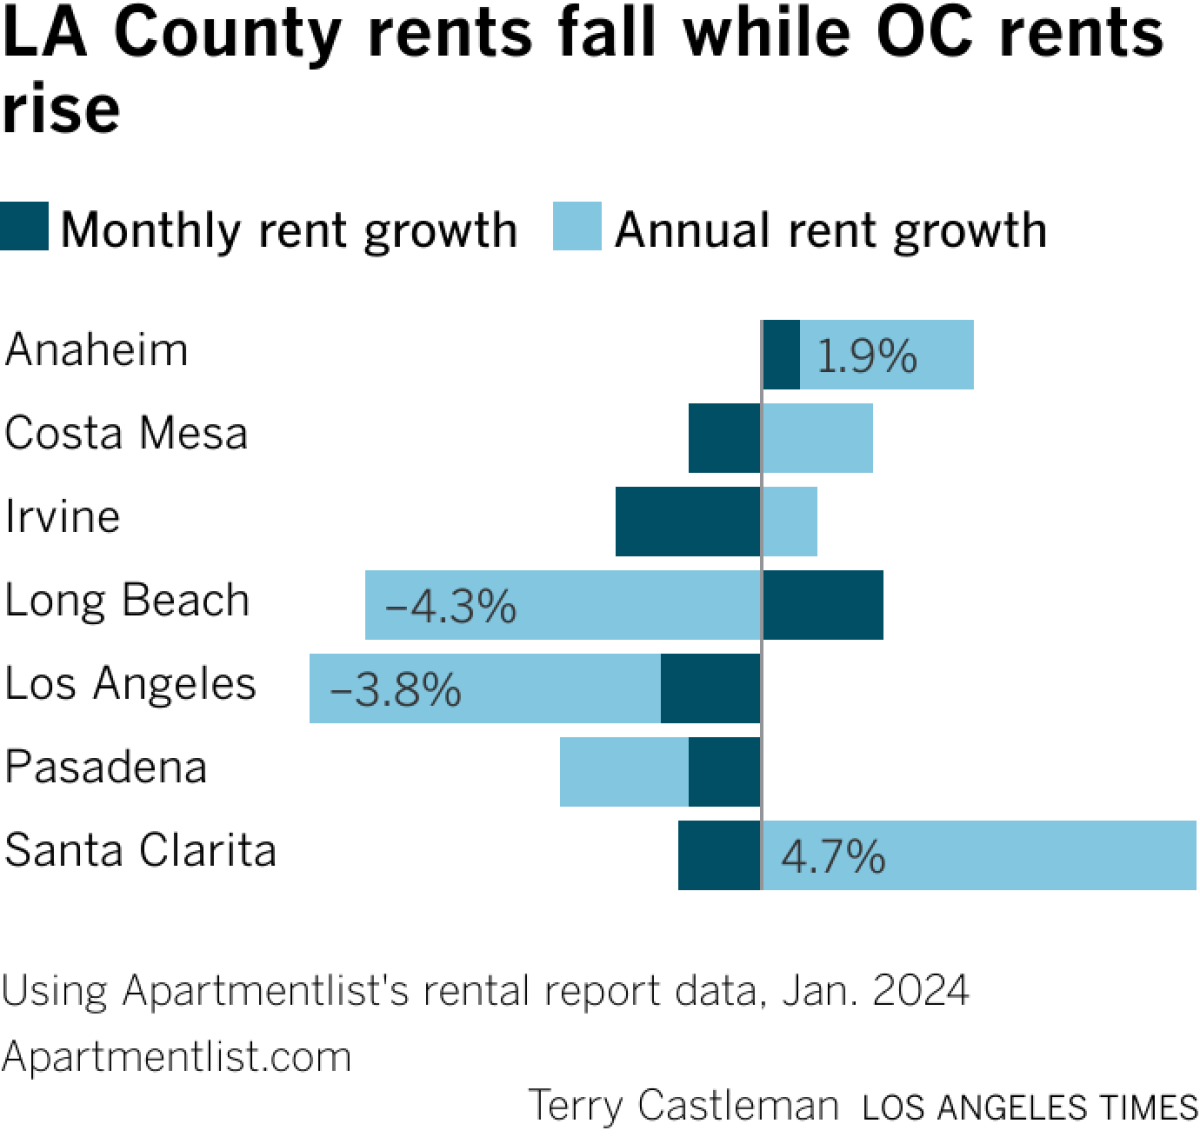 Chart shows falling rent prices in Long Beach, Los Angeles while prices climb in Santa Clarita, Anaheim